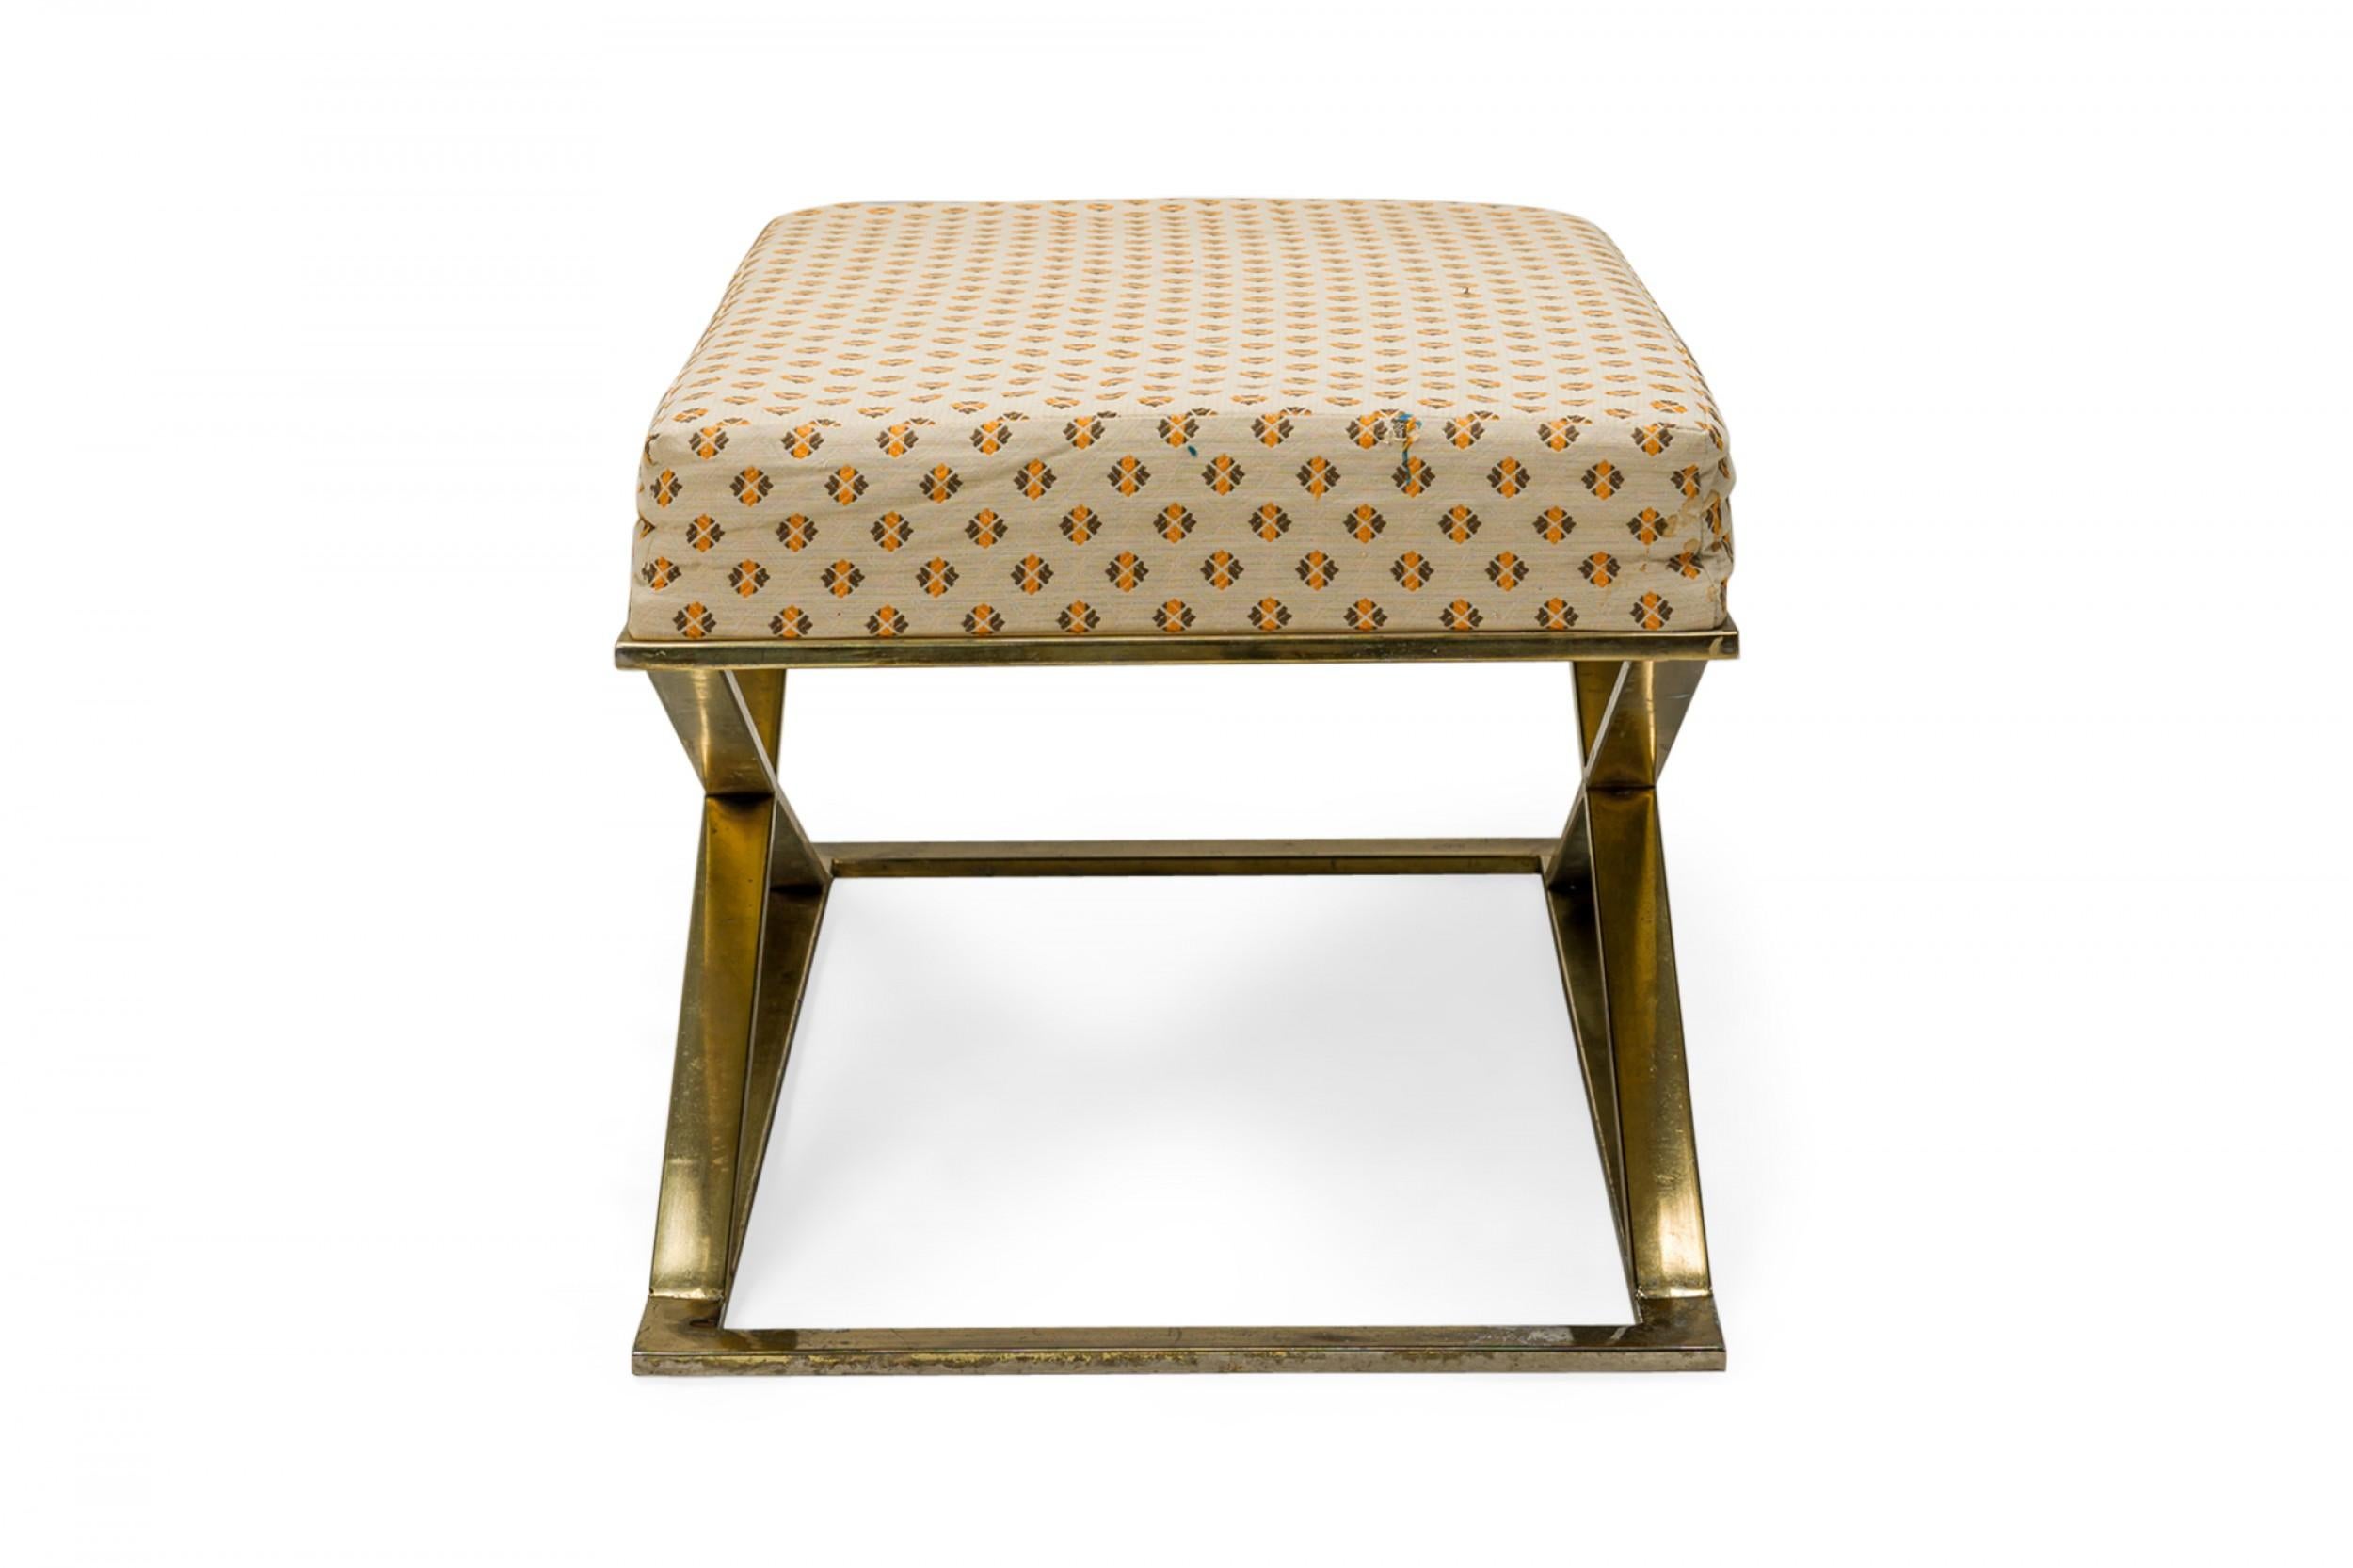 Milo Baughman / Thayer Coggin Brass and Beige Patterned Upholstered X-Bench In Good Condition For Sale In New York, NY